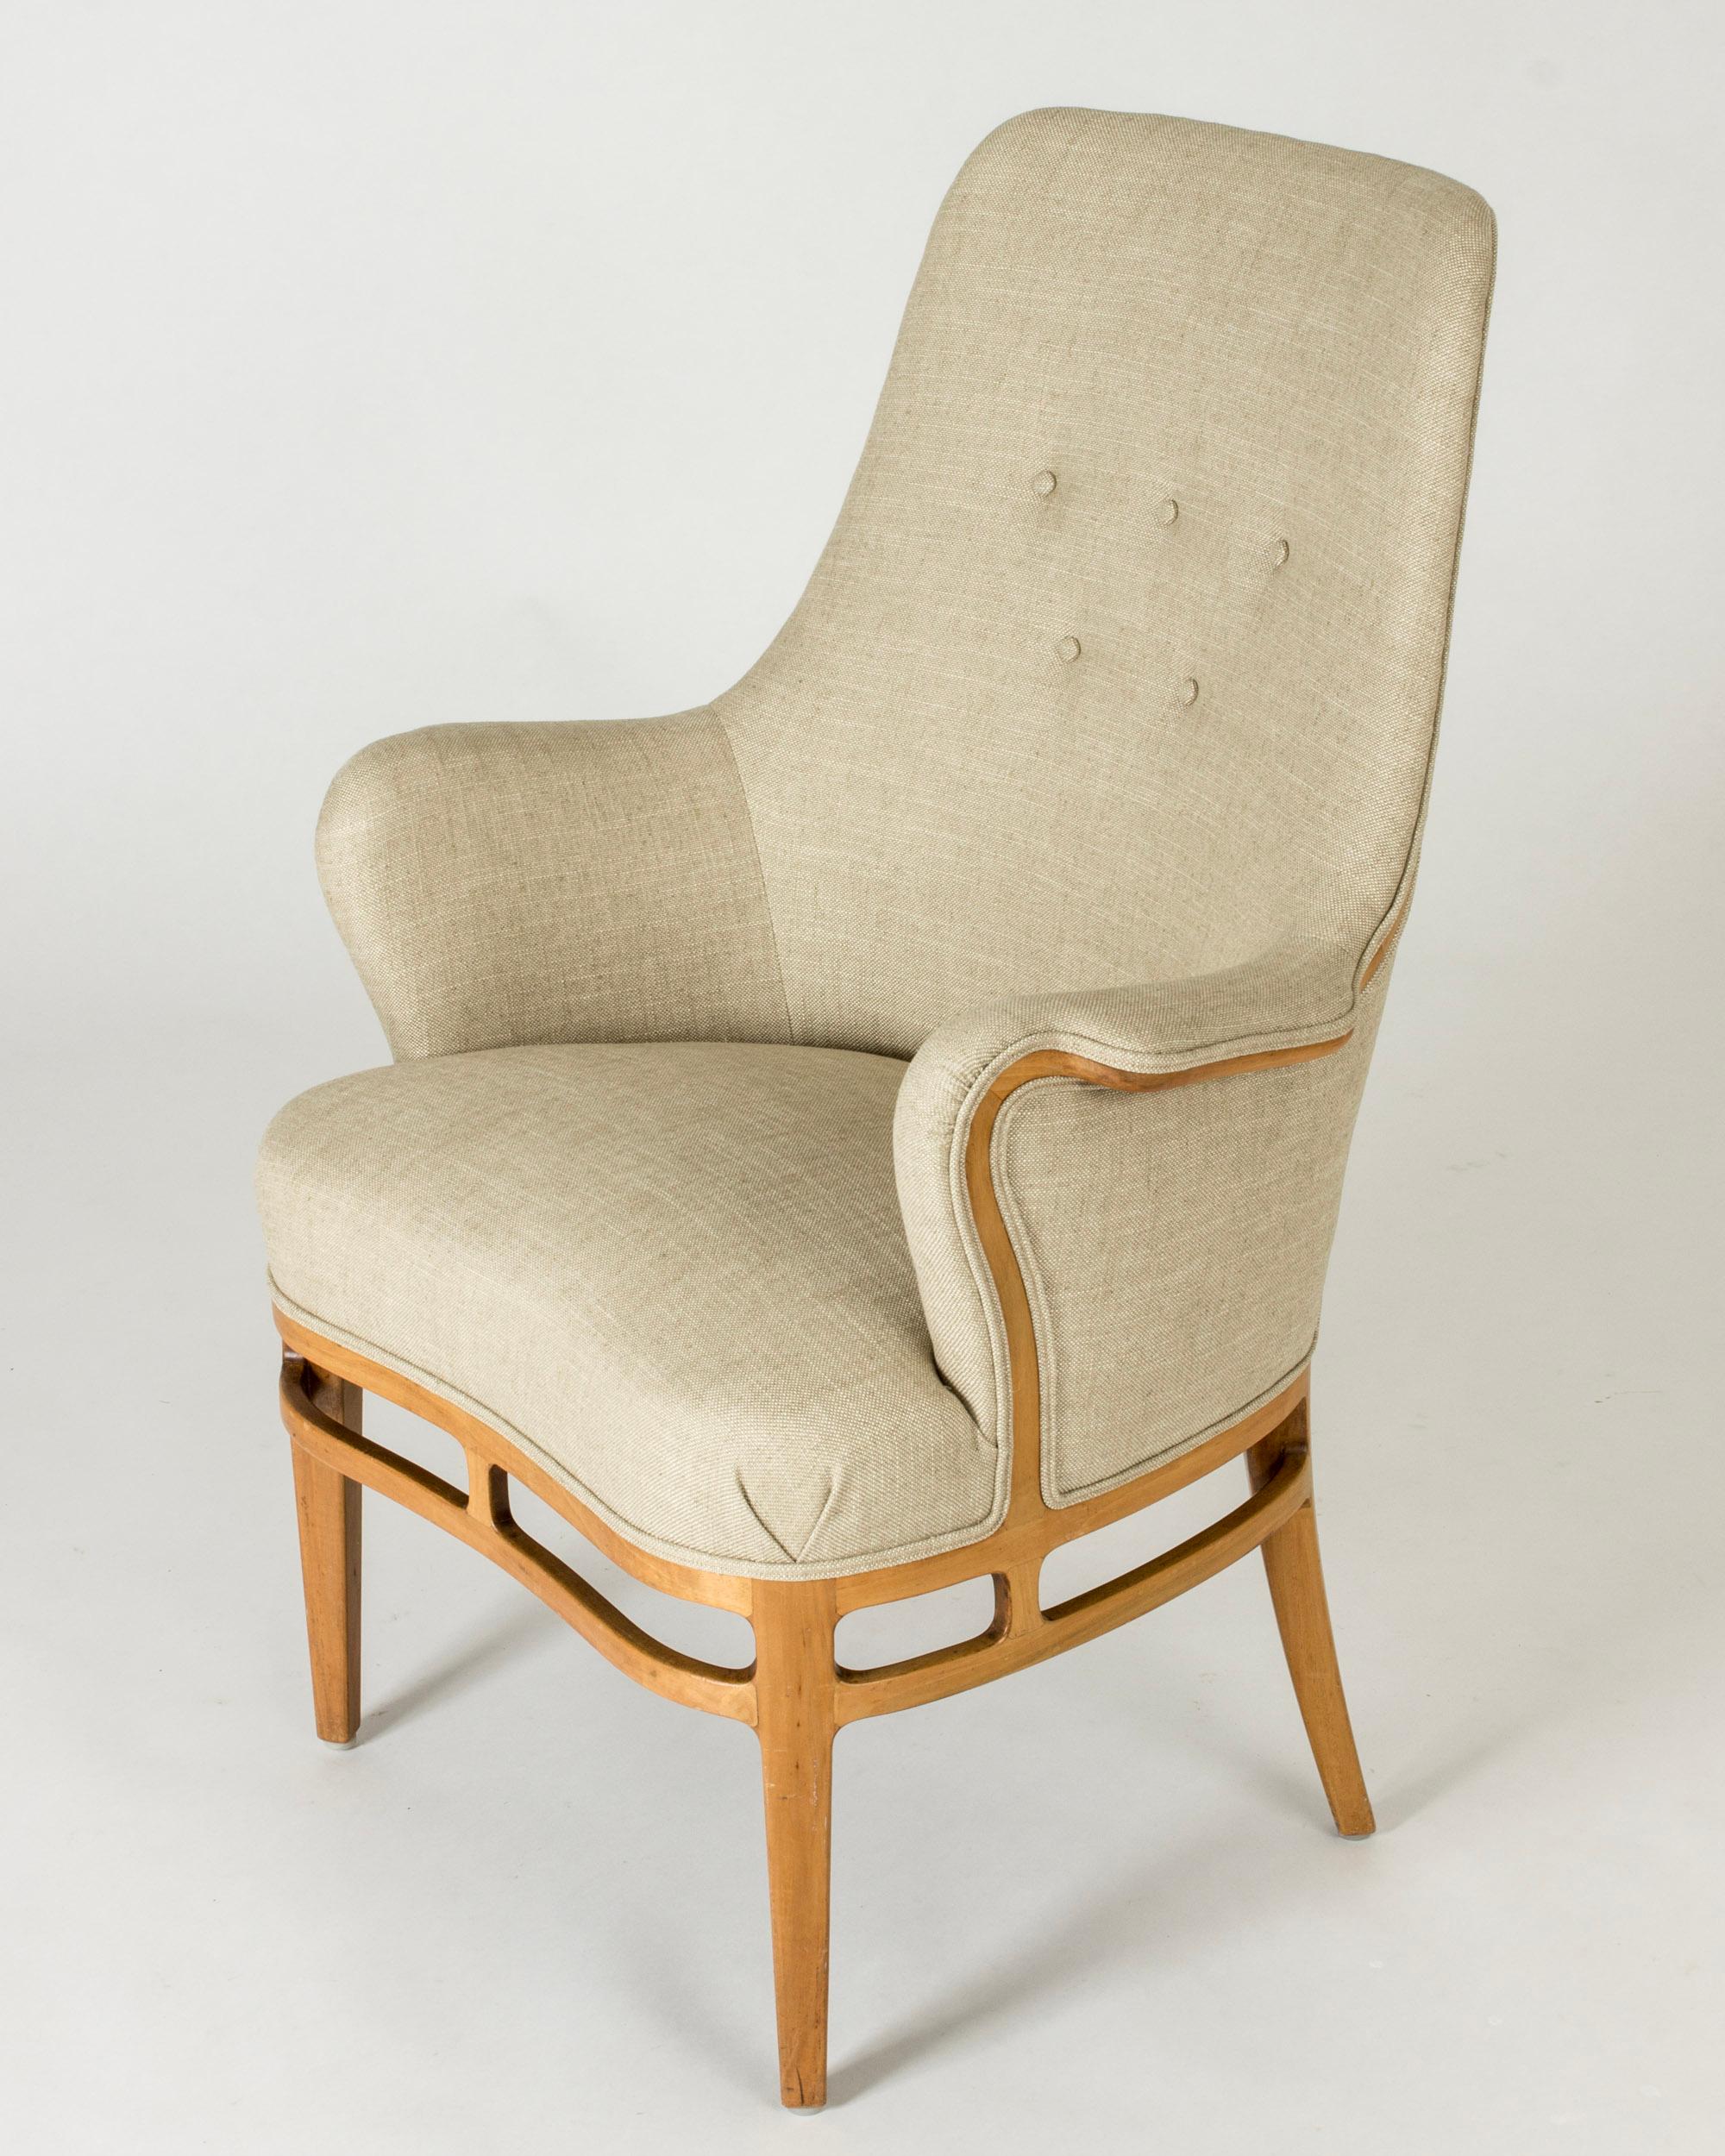 Swedish Scandinavian Modernist Lounge Chair by Carl-Axel Acking, Sweden, 1950s For Sale